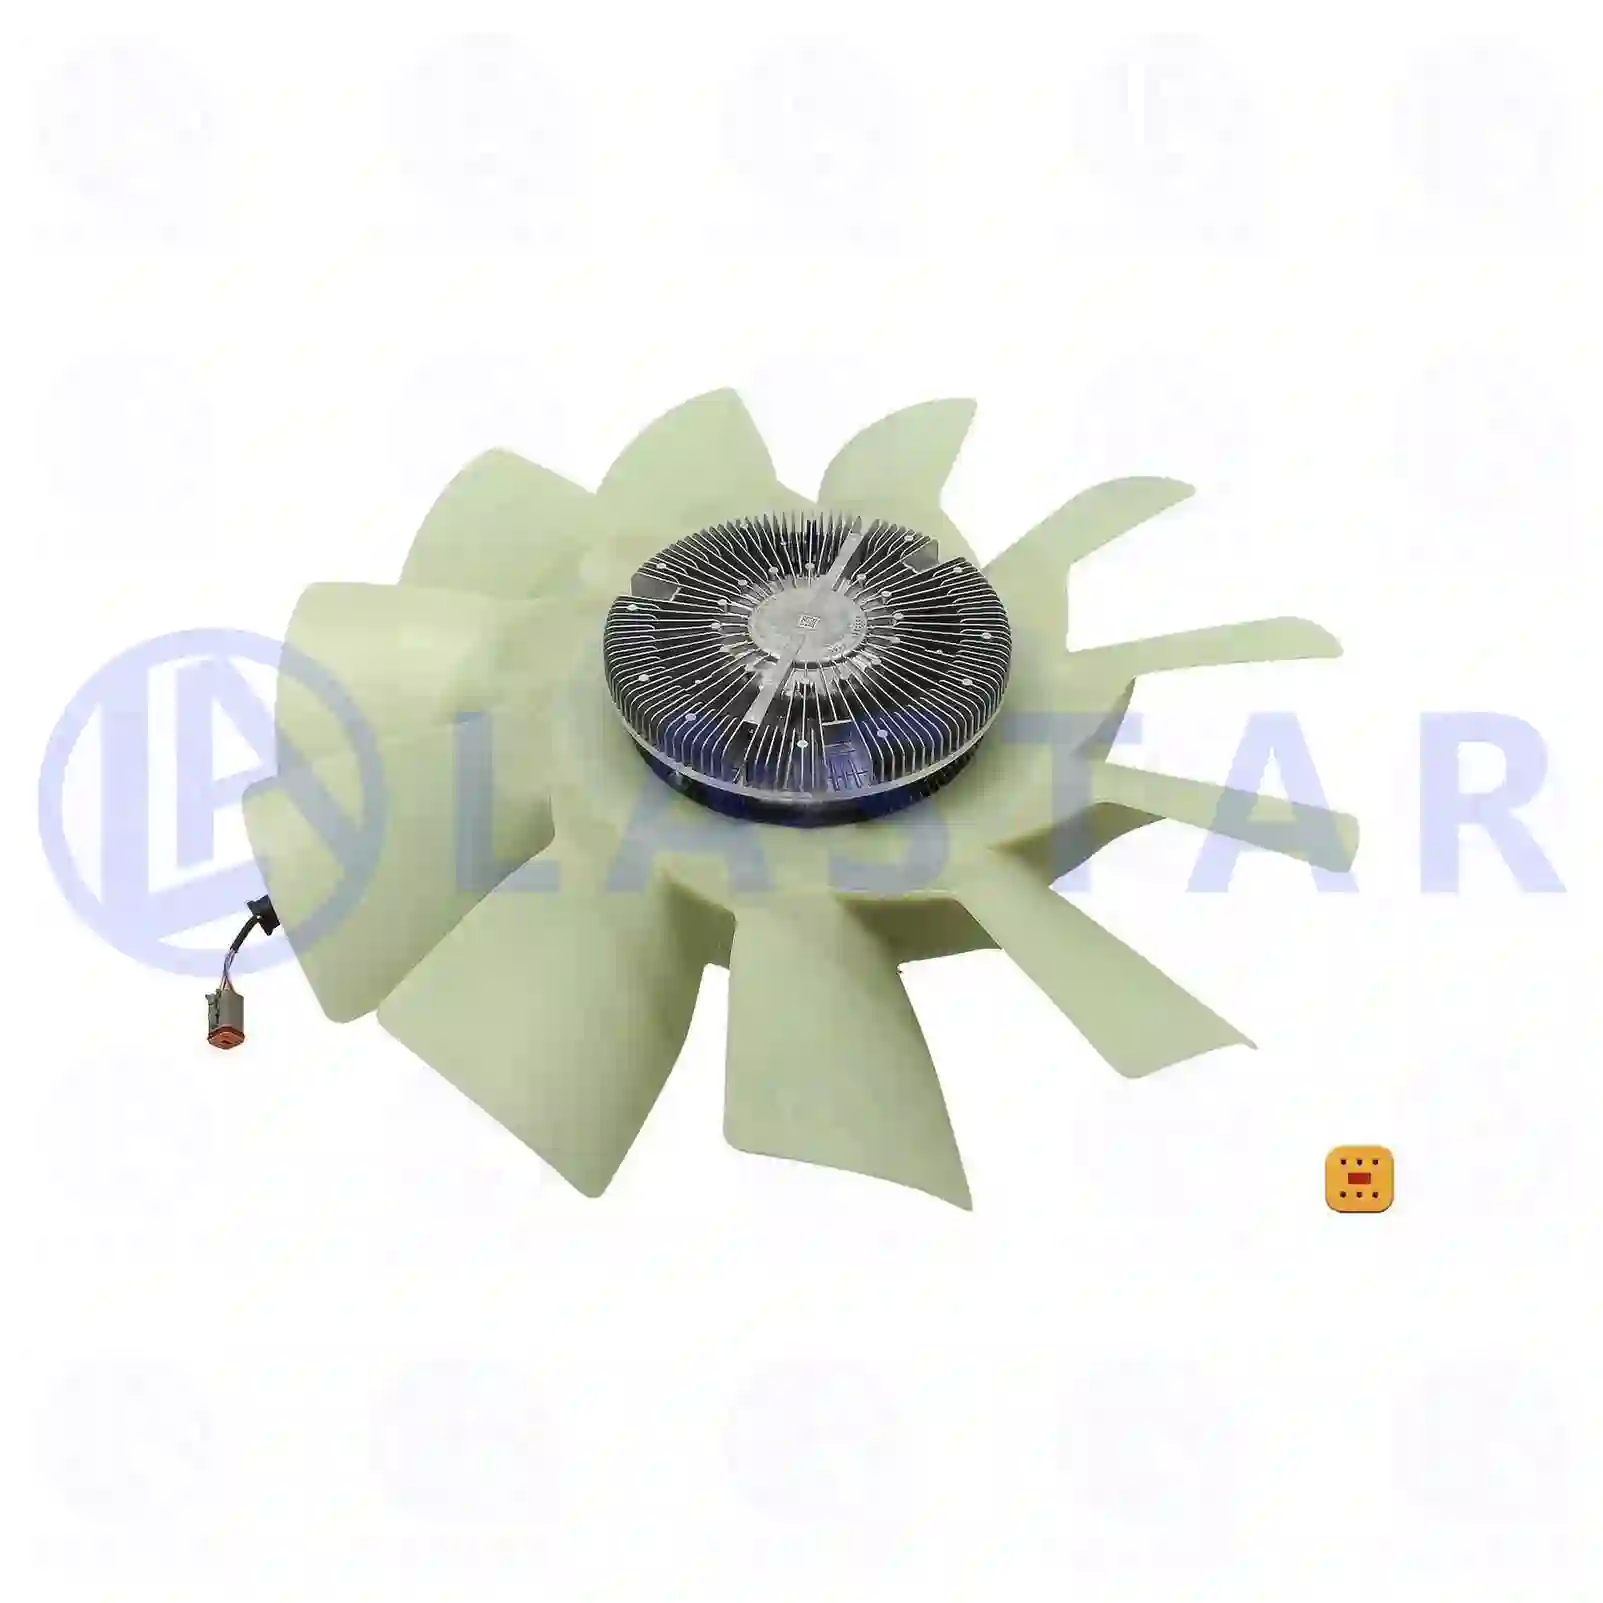 Fan with clutch, 77709823, 1776551, 1849914, 1914177, 2035611, ZG00396-0008 ||  77709823 Lastar Spare Part | Truck Spare Parts, Auotomotive Spare Parts Fan with clutch, 77709823, 1776551, 1849914, 1914177, 2035611, ZG00396-0008 ||  77709823 Lastar Spare Part | Truck Spare Parts, Auotomotive Spare Parts